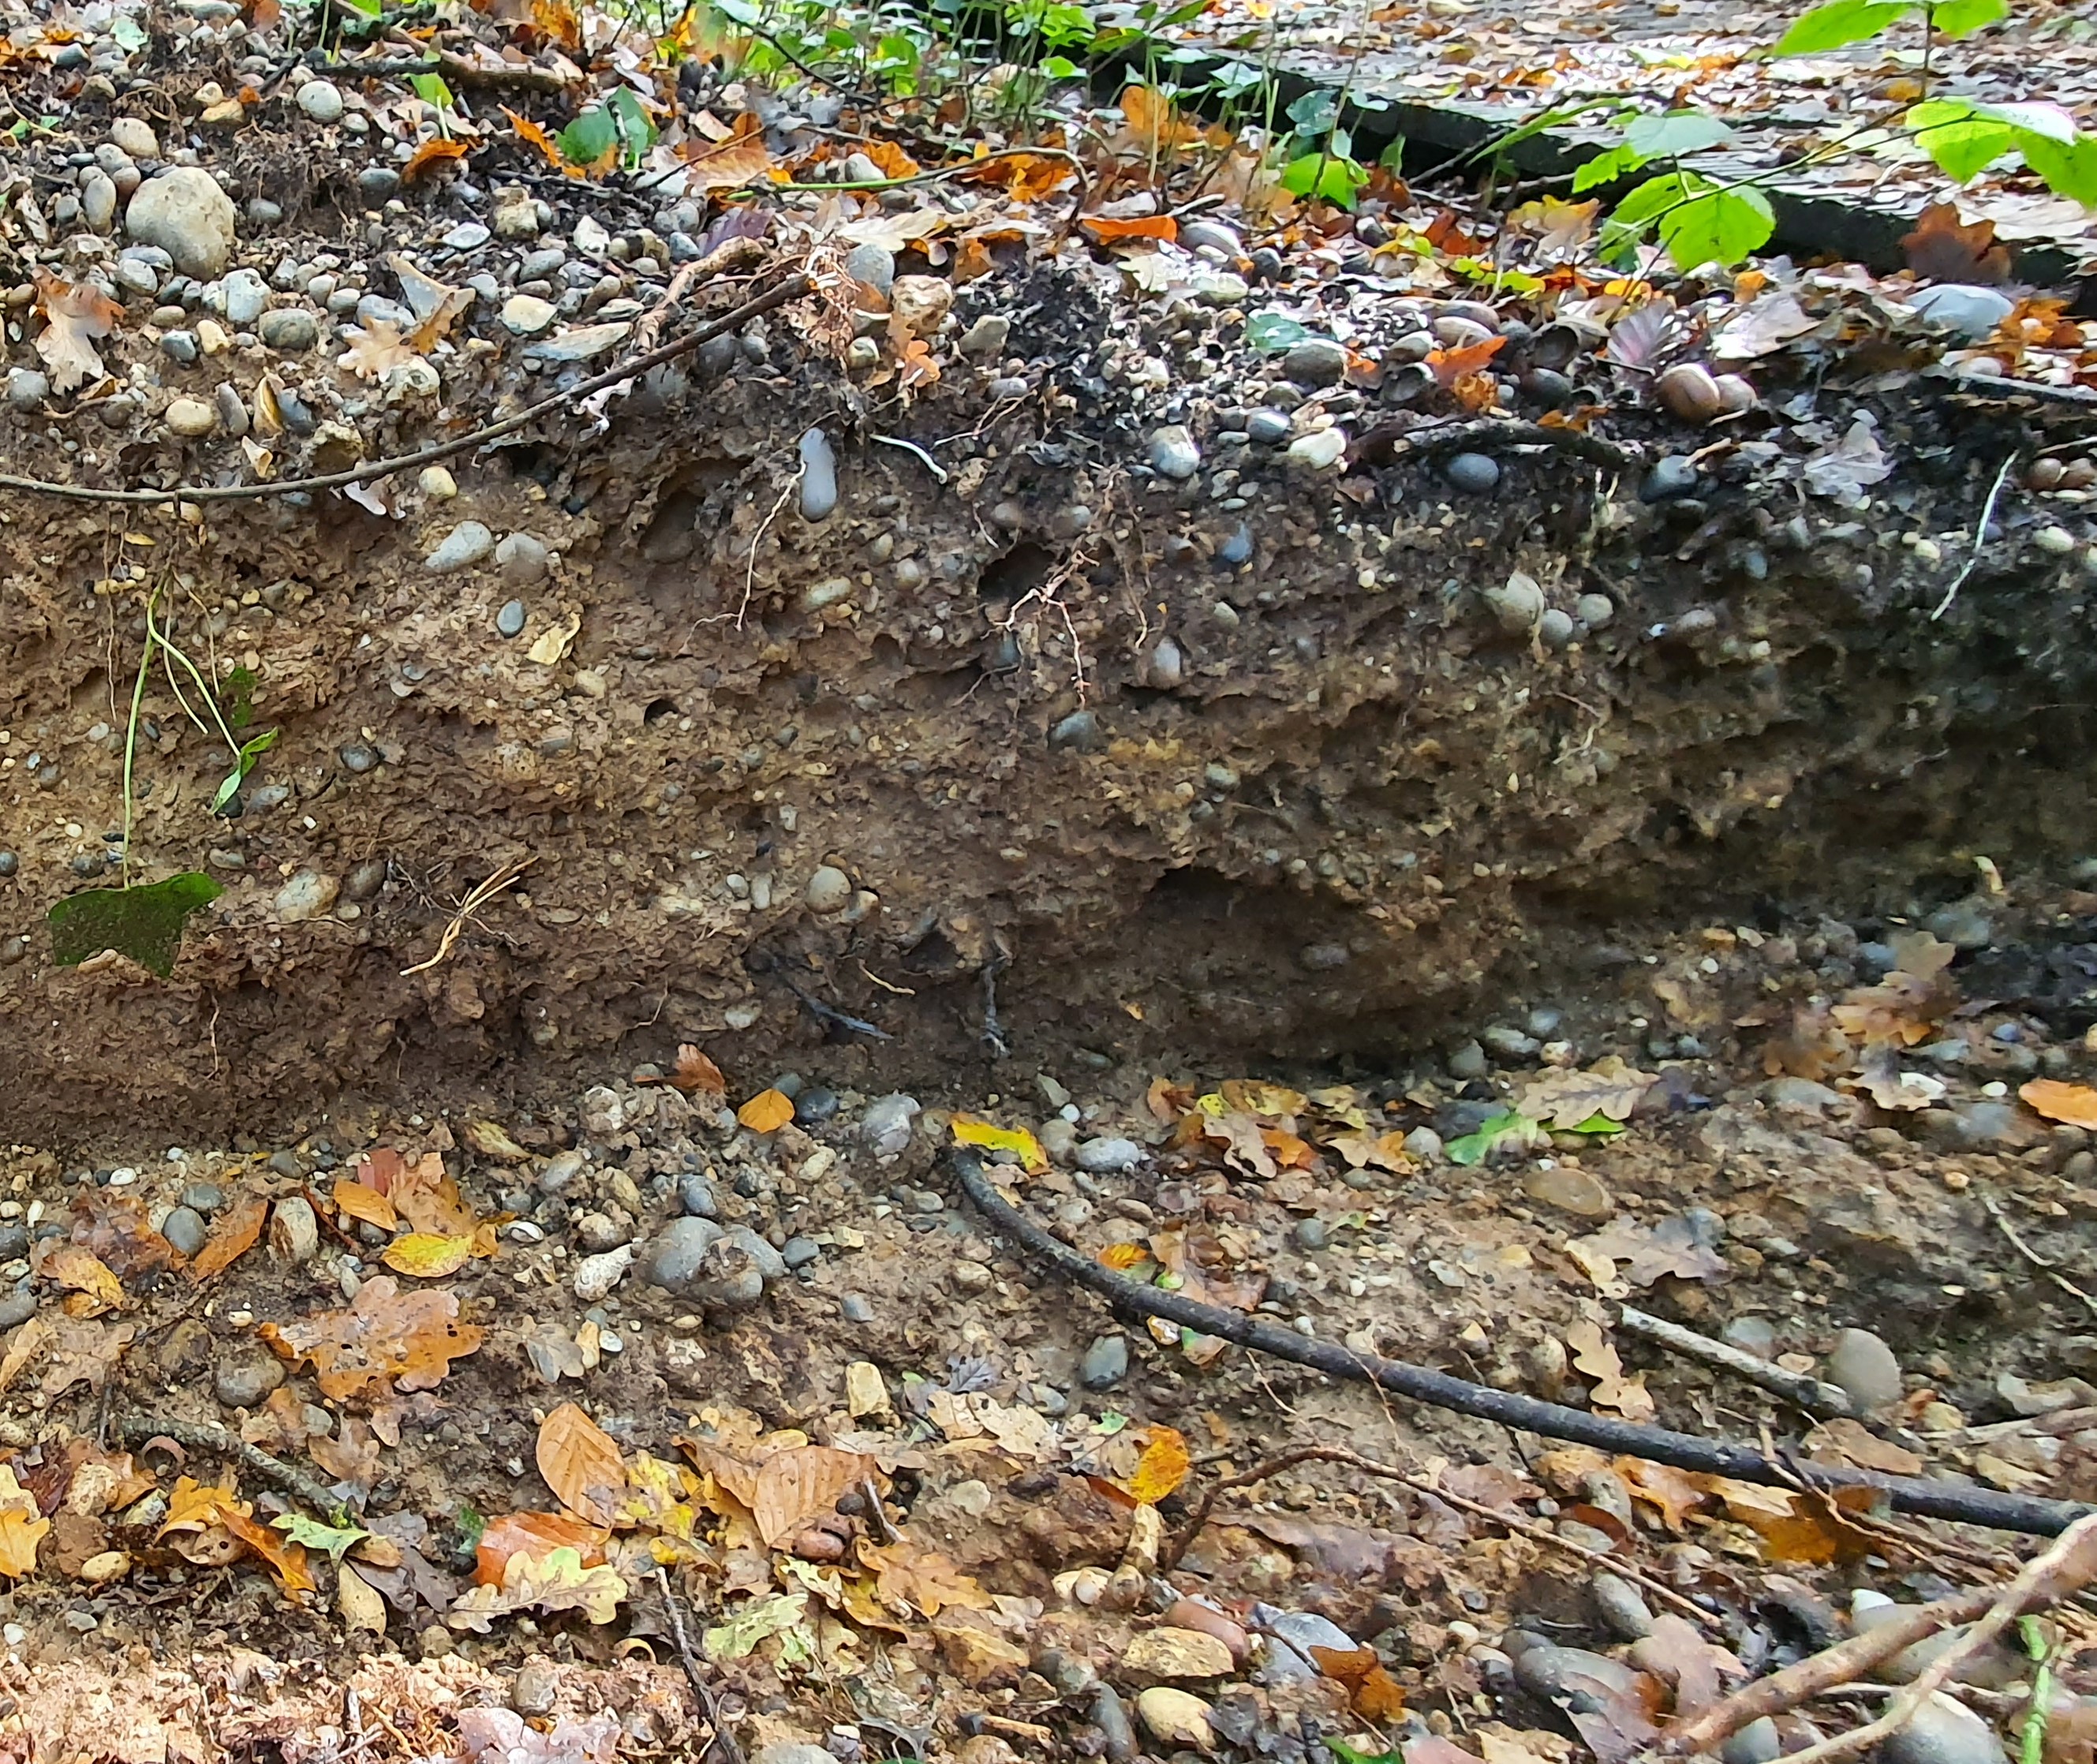 exposed bank showing pebble distribution